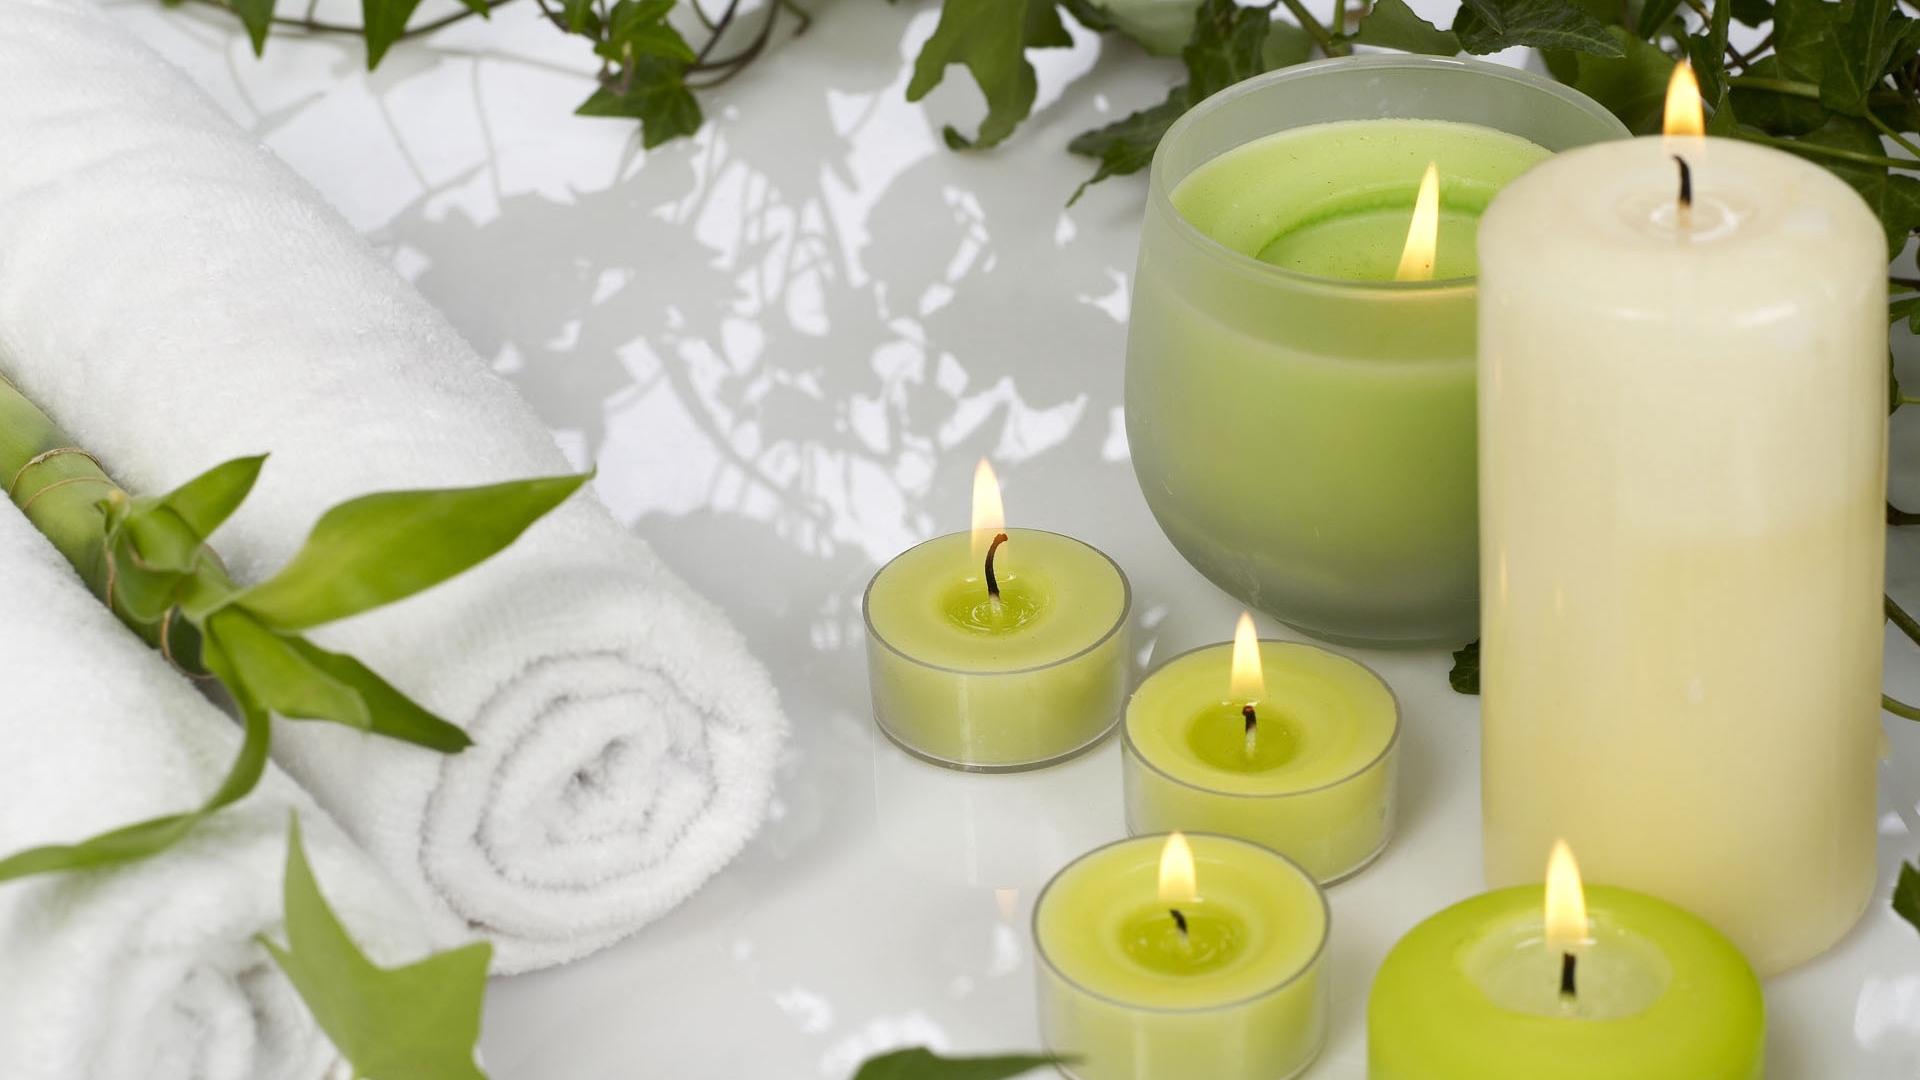 Download wallpaper 1920x1080 candles, aromatherapy, leaves, massage